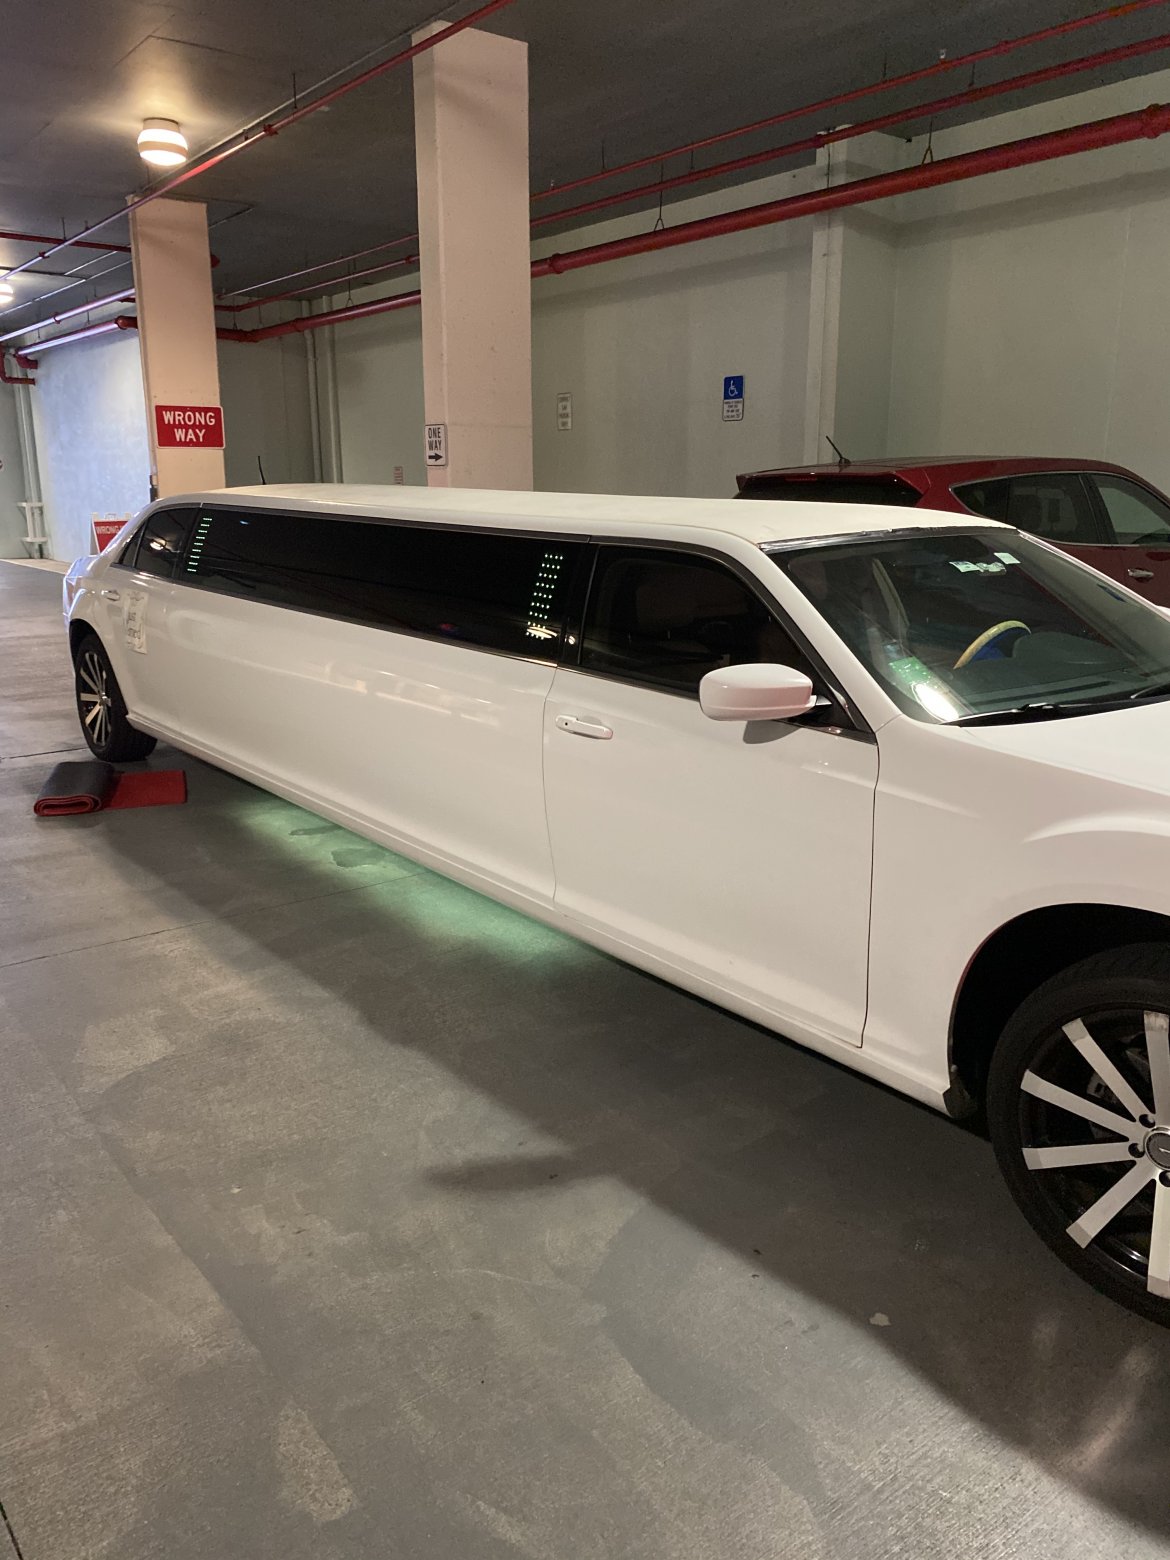 Limousine for sale: 2014 Chrysler 300 120&quot; by Pinnacle limousine manufacturing